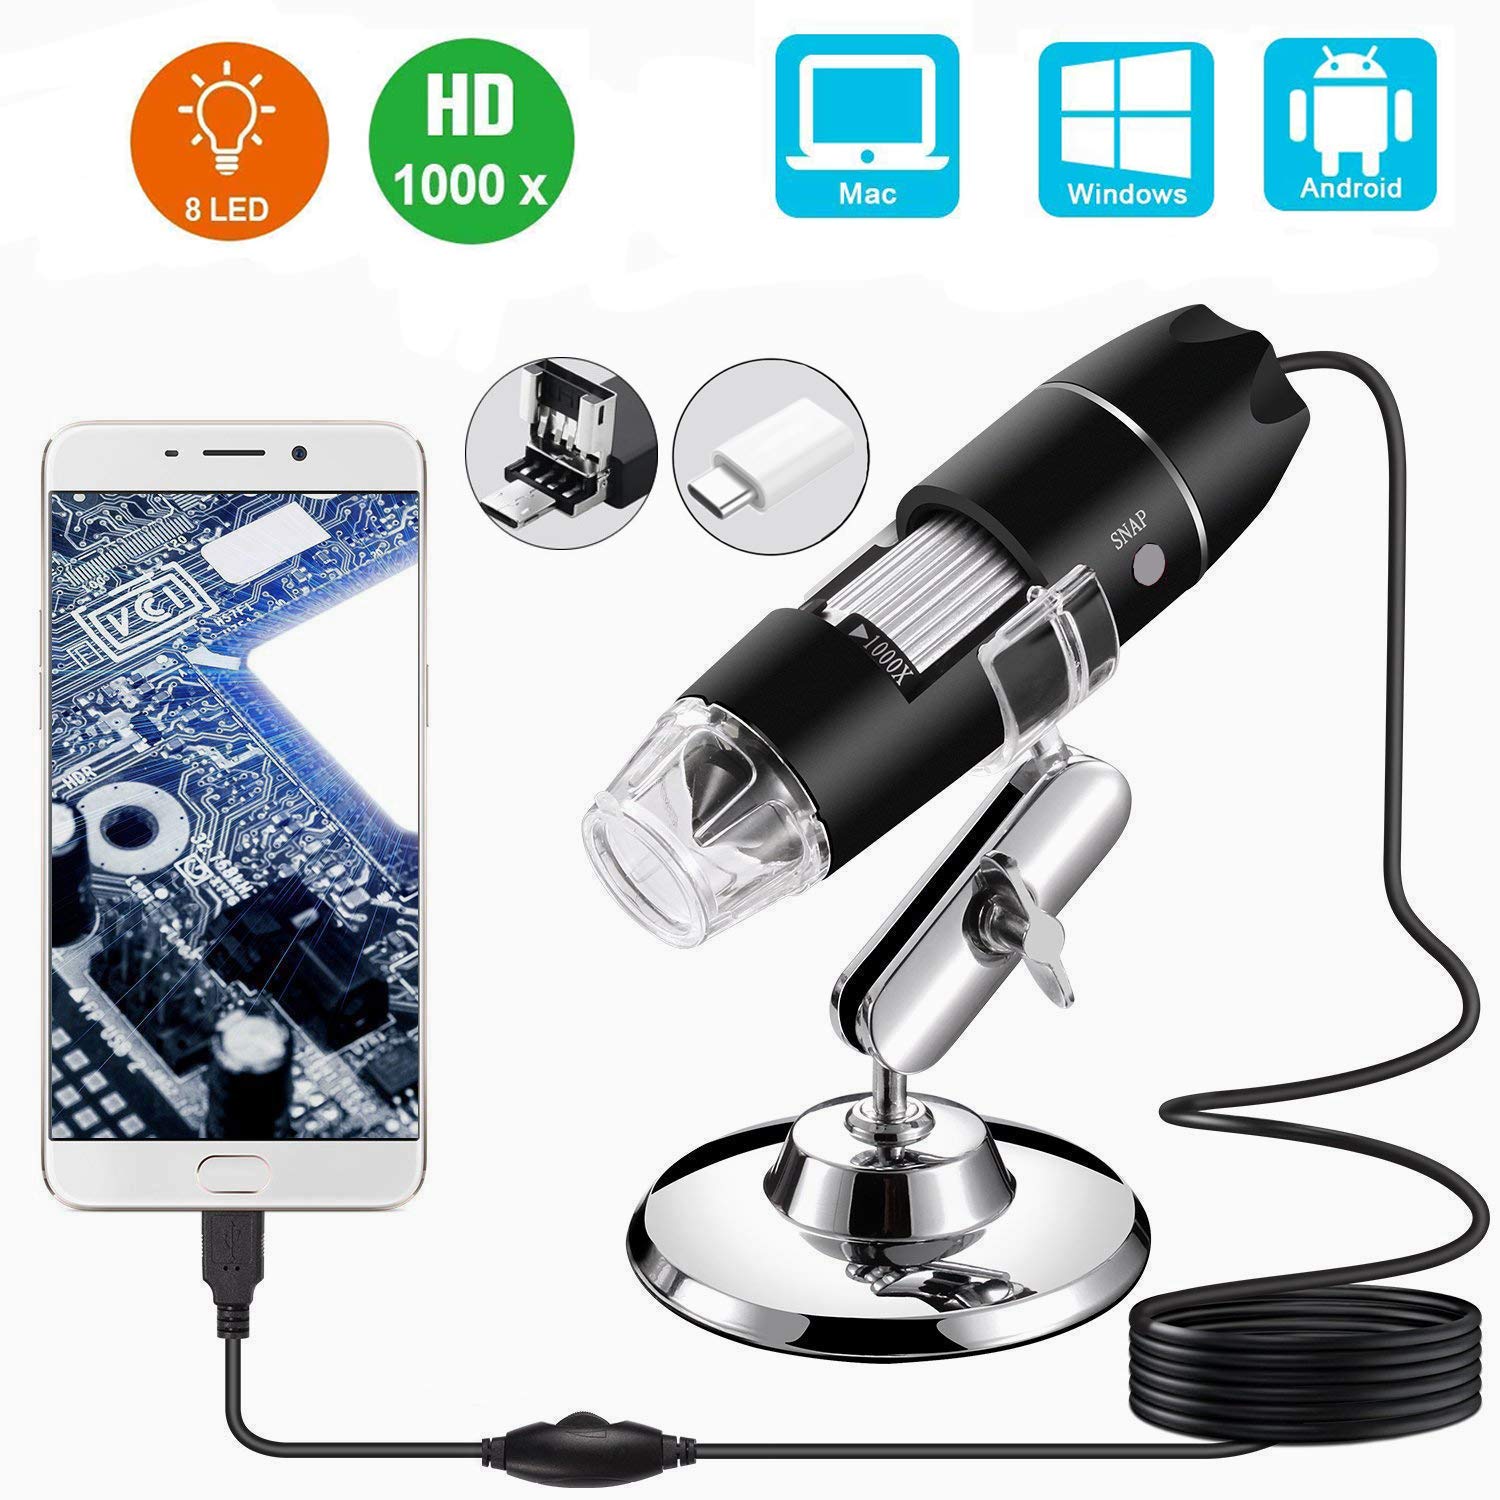 Top 10 Best Microscope for Kids Reviews in 2022 2